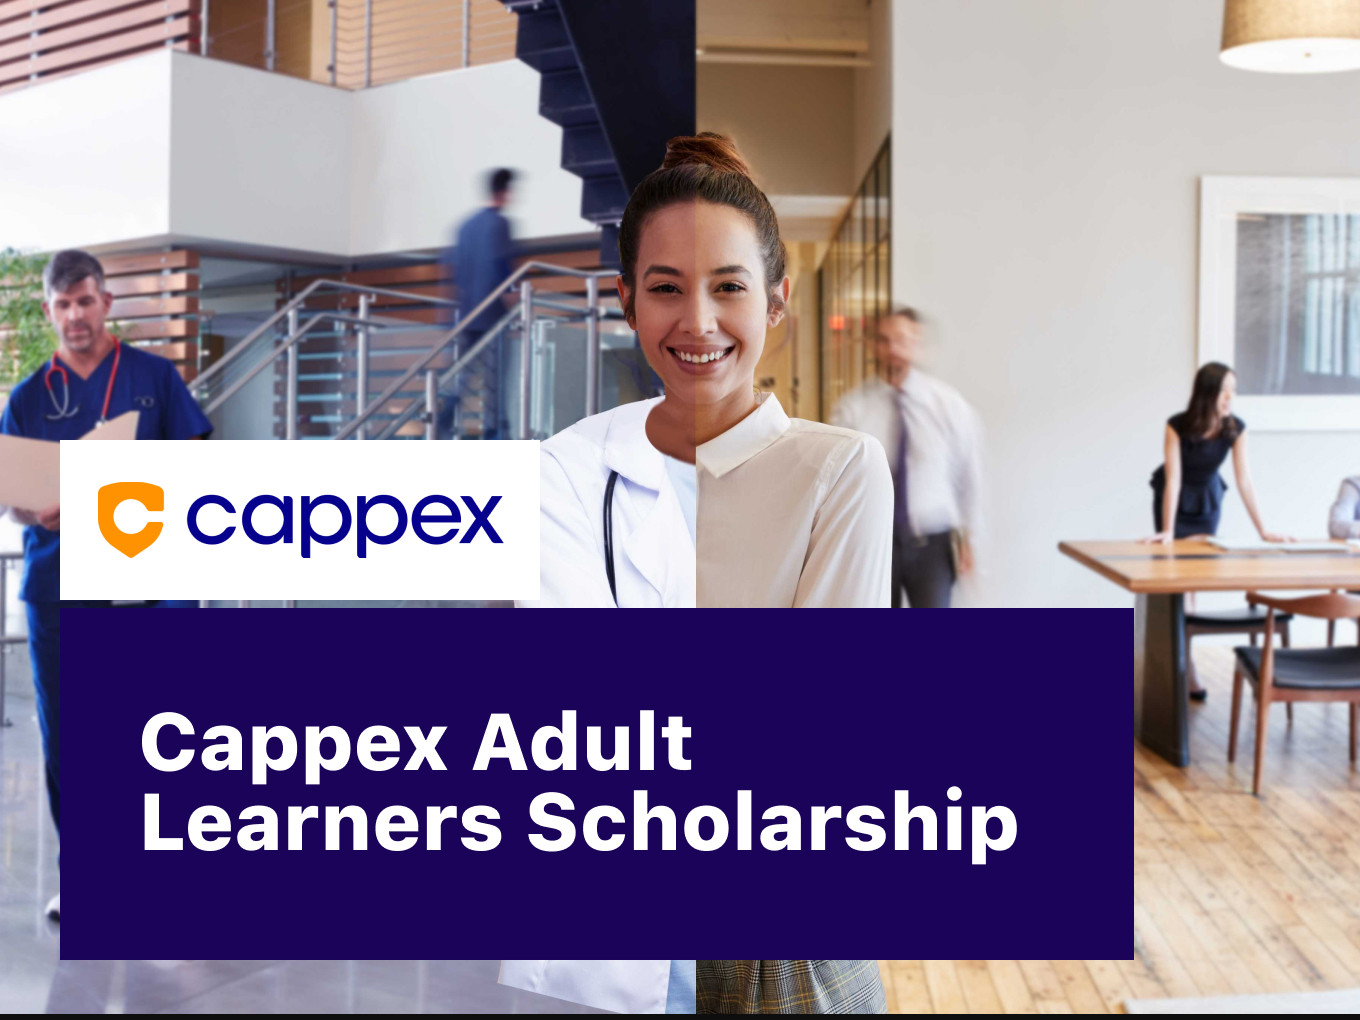 Cappex Adult Learners $1000 Scholarship